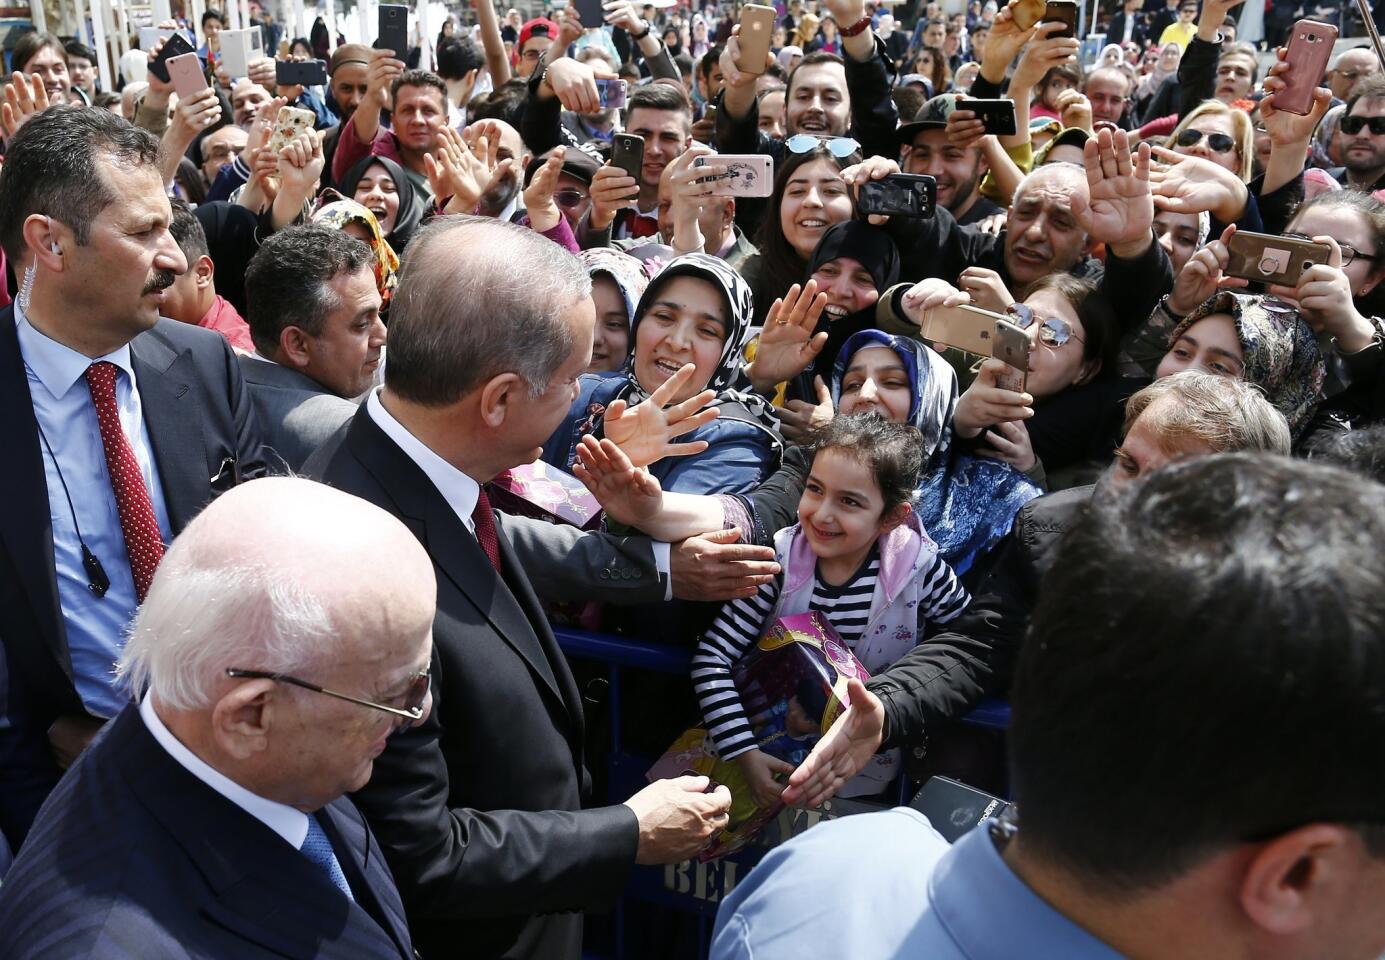 Turkish President Recep Tayyip Erdogan greets a girl in a crowd after praying at Eyup Sultan mosque, Istanbul, Turkey.